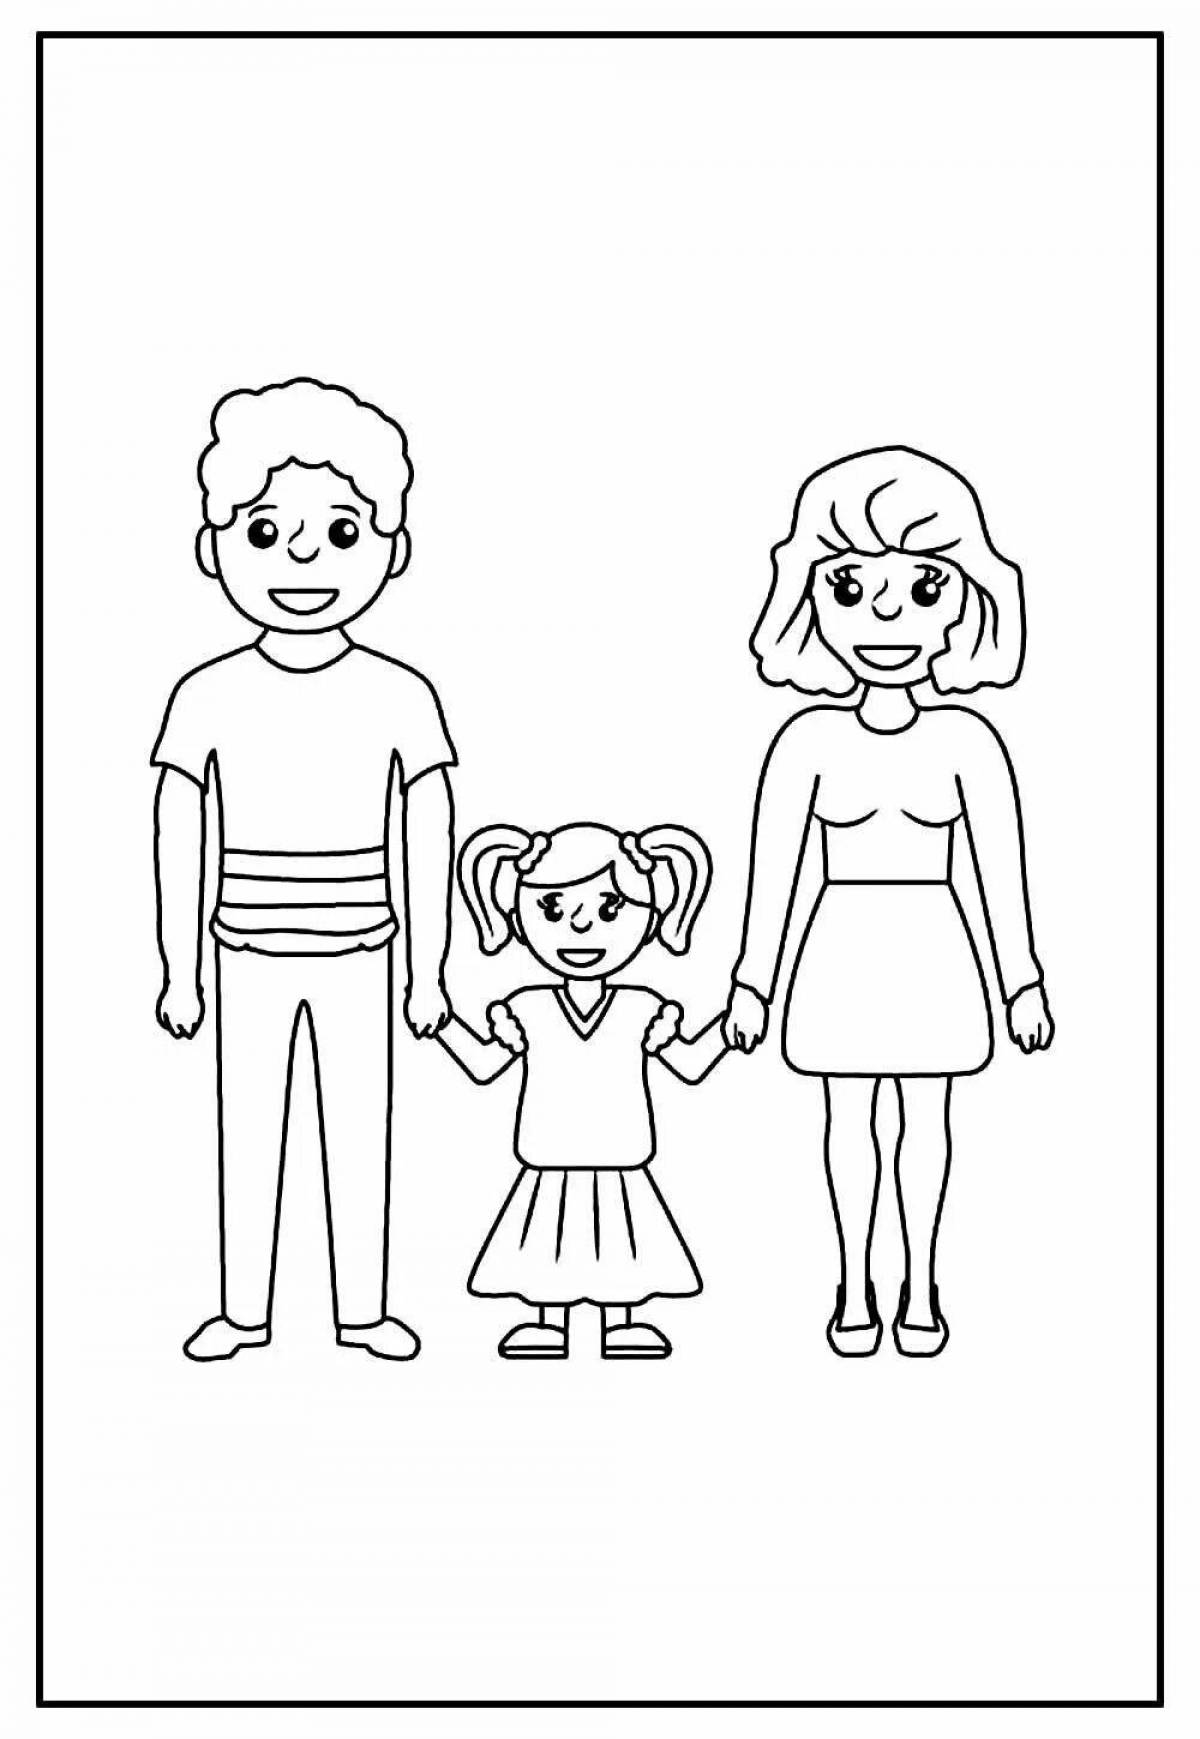 Smiling family of 3 coloring book